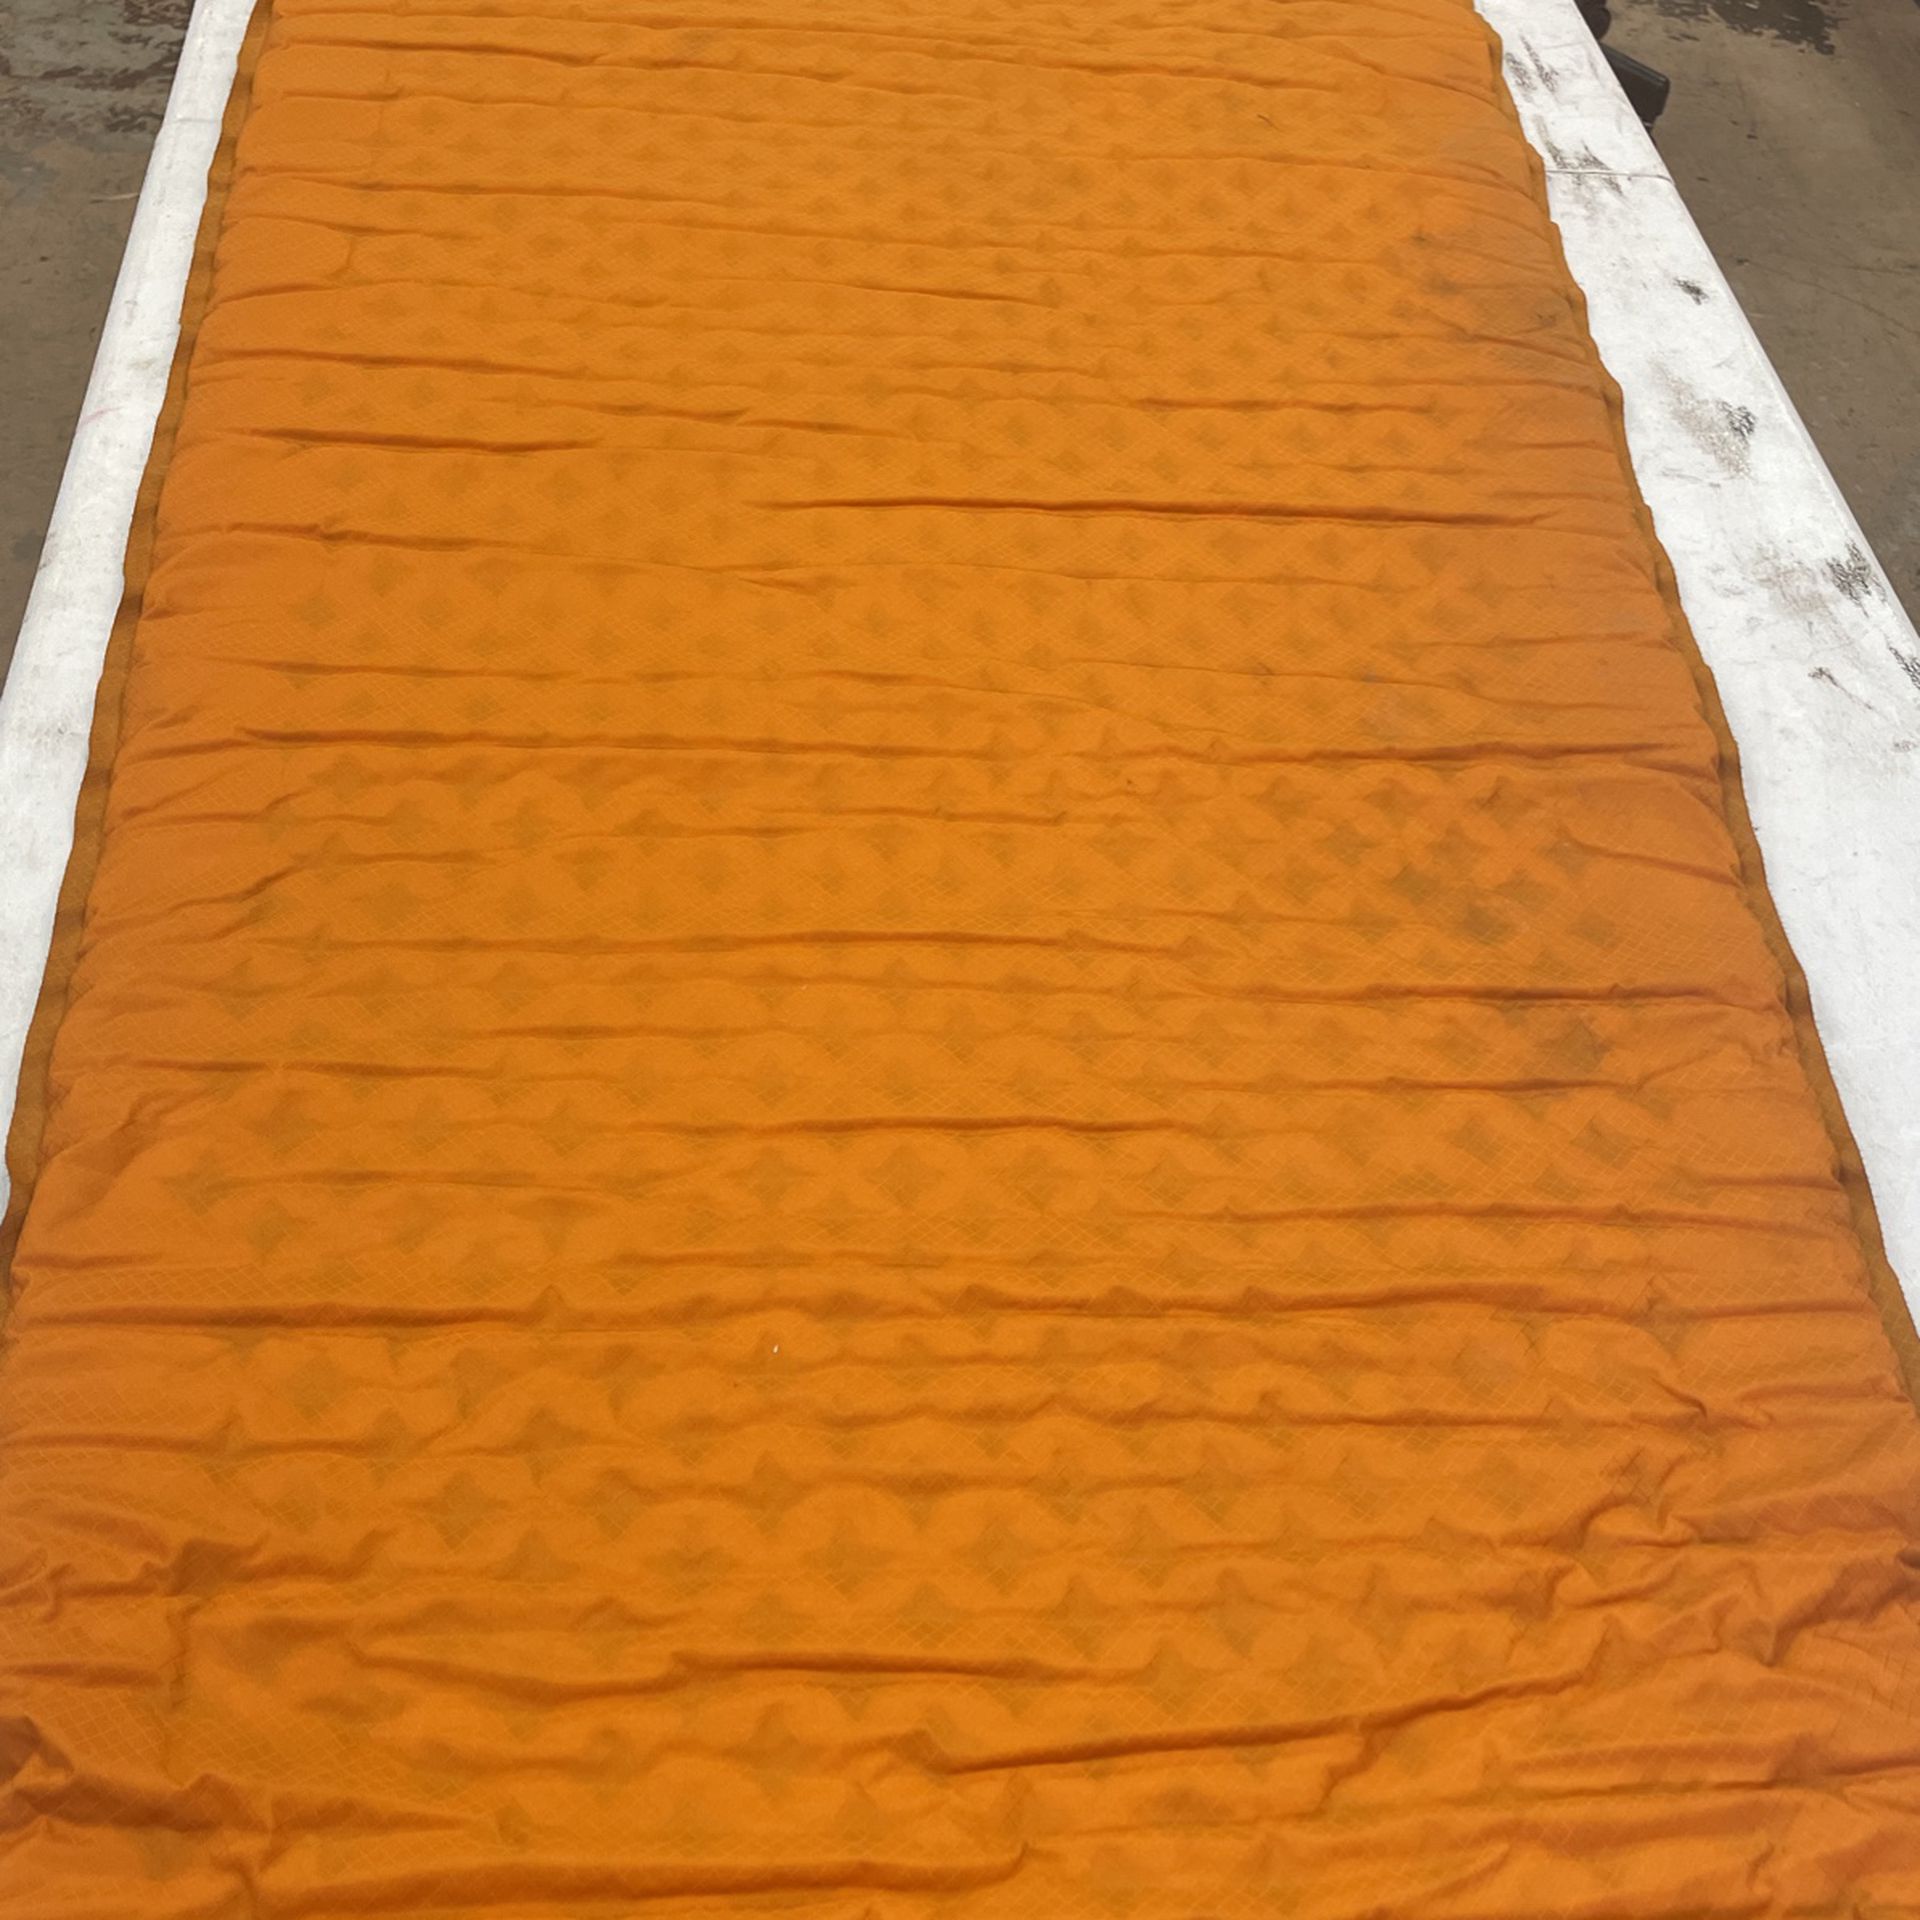 Thermarest Air Mattress Large + Pillow / Case 